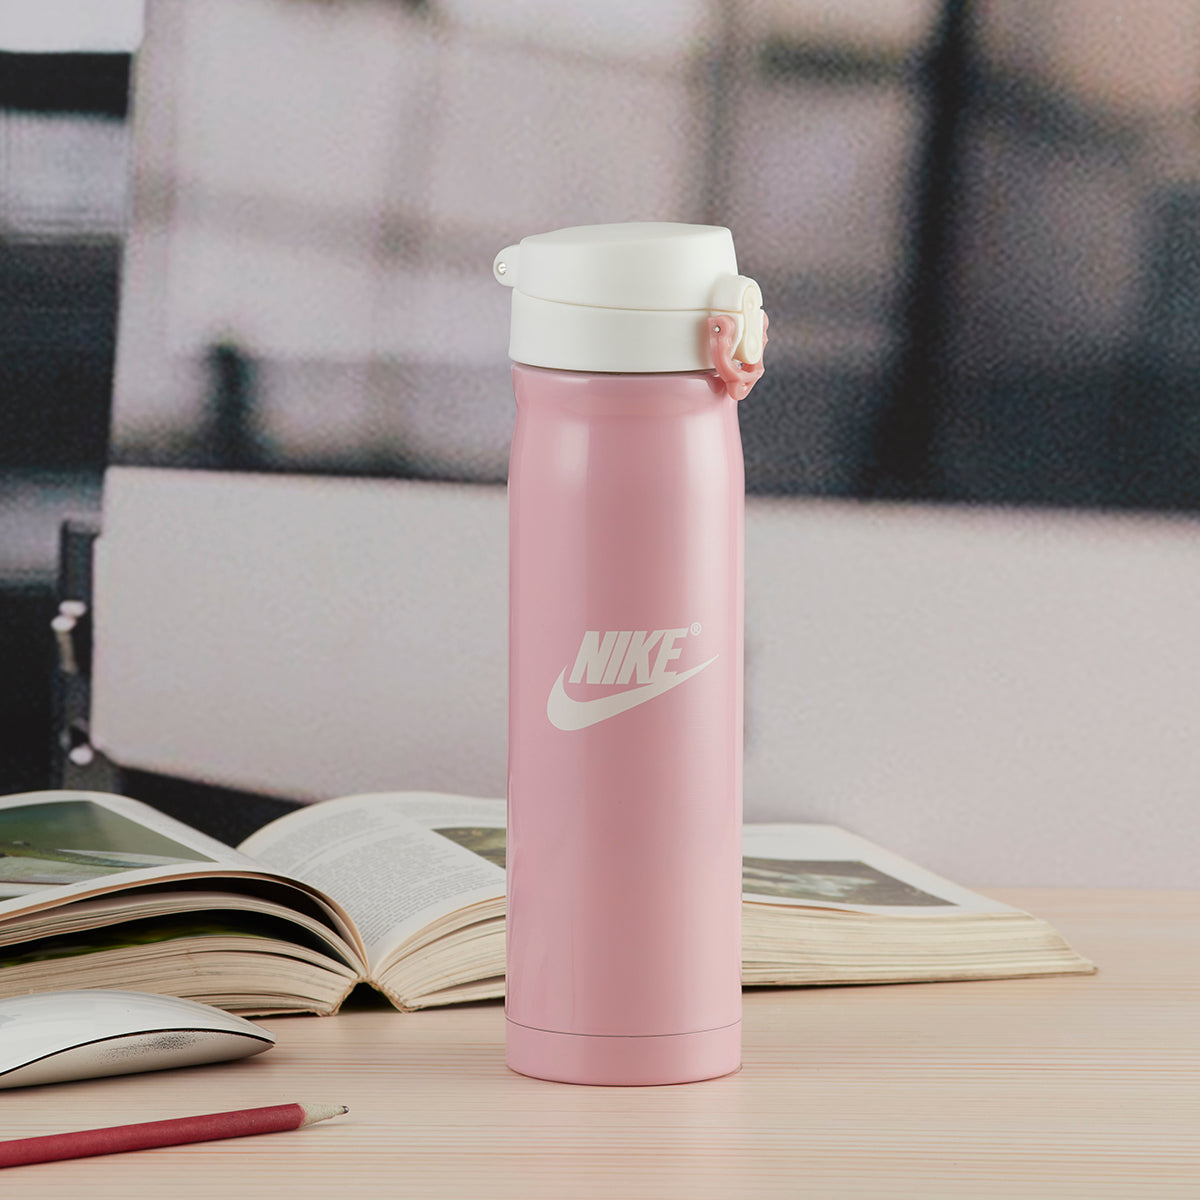 Stainless Steel Vacuum Insulated double wall Water Bottle - 500ml (ART01671)